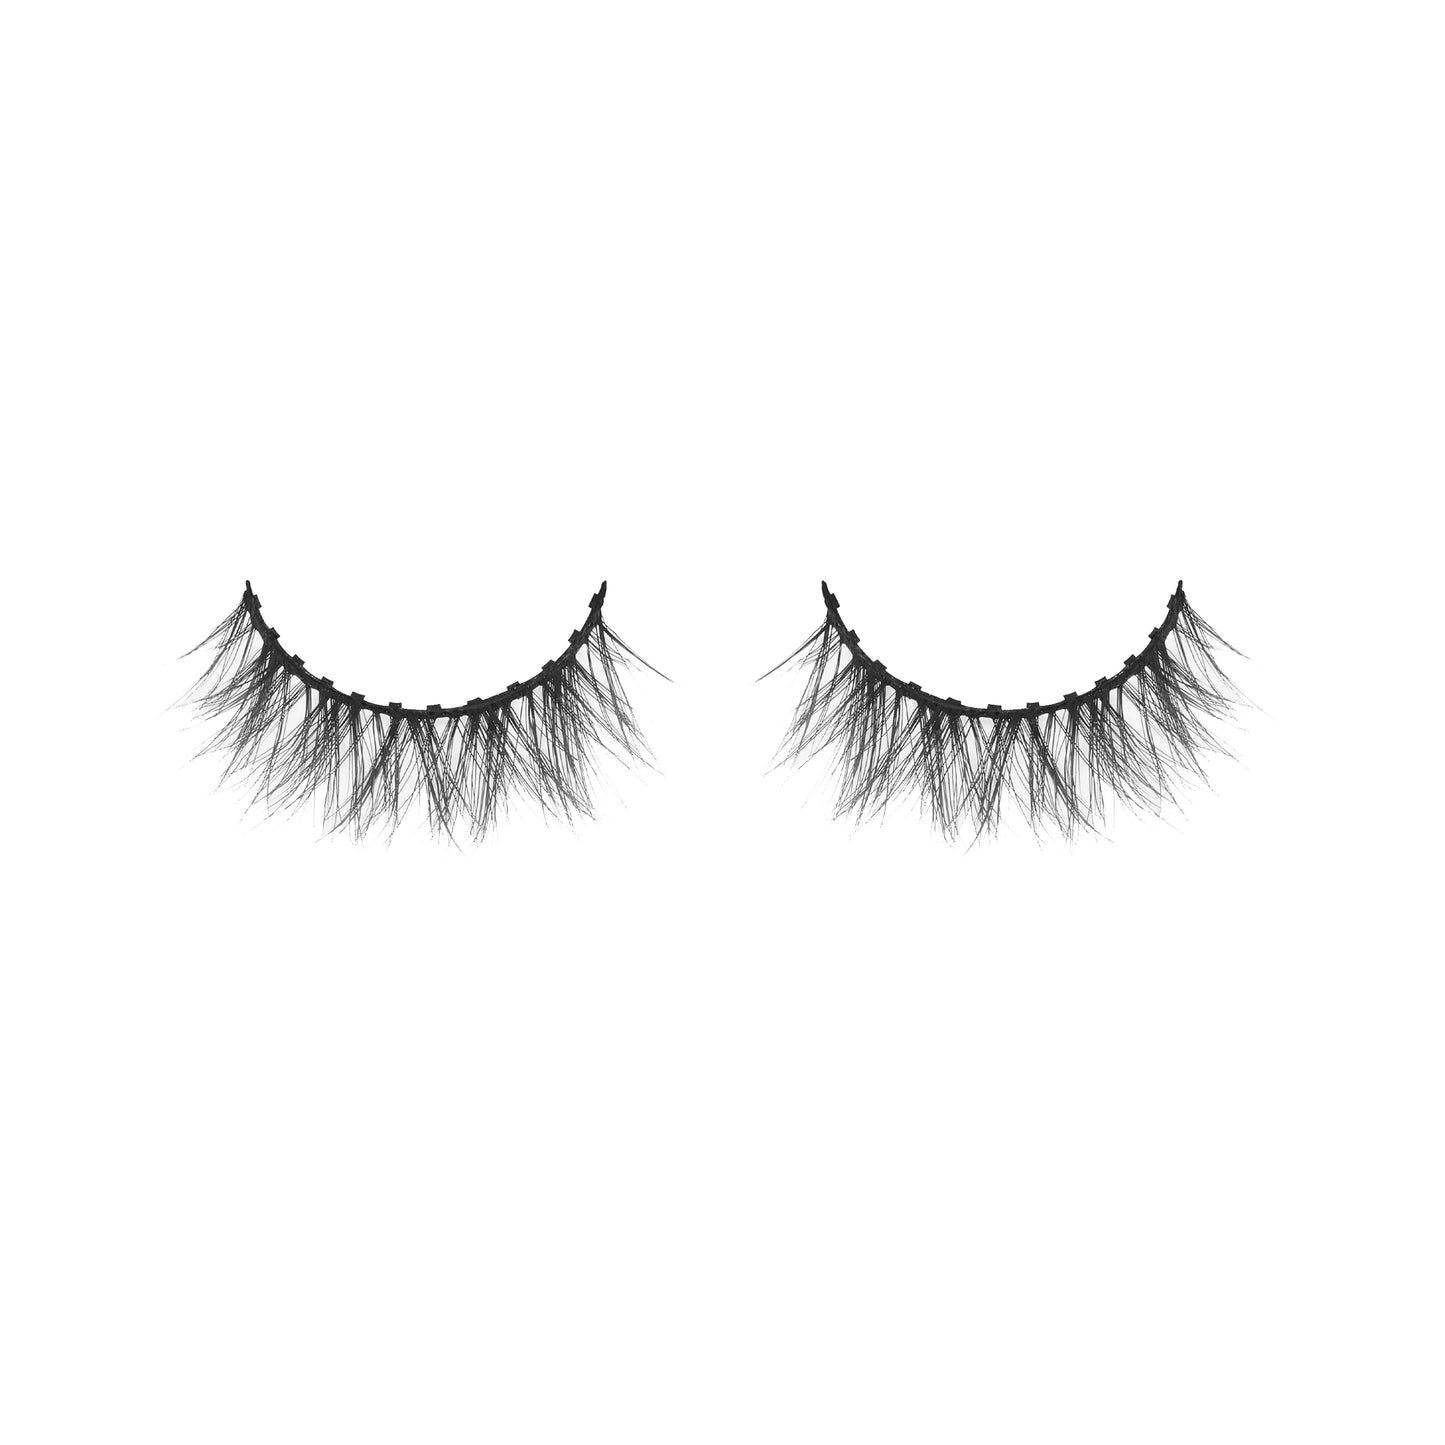 Lilly Lashes Click Magnetic Lashes For Life